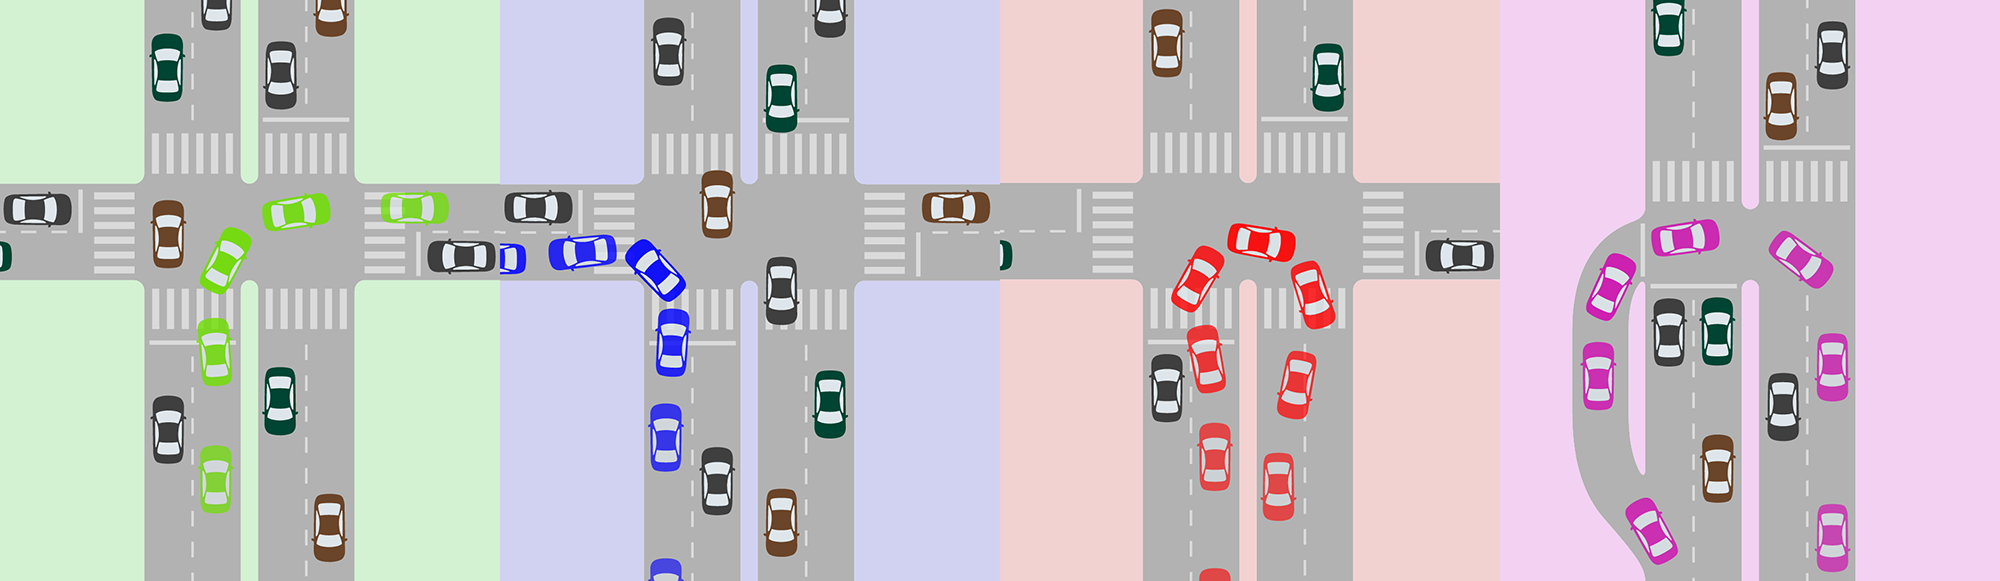 Fig. 24.6 Example of a cross-traffic turn (green car), a curbside turn (blue car), a U-turn without space (red car), and a U-turn with space (pink car) for left-hand-oriented driving in India, Indonesia, South Africa, Tanzania, Australia, and the United Kingdom.